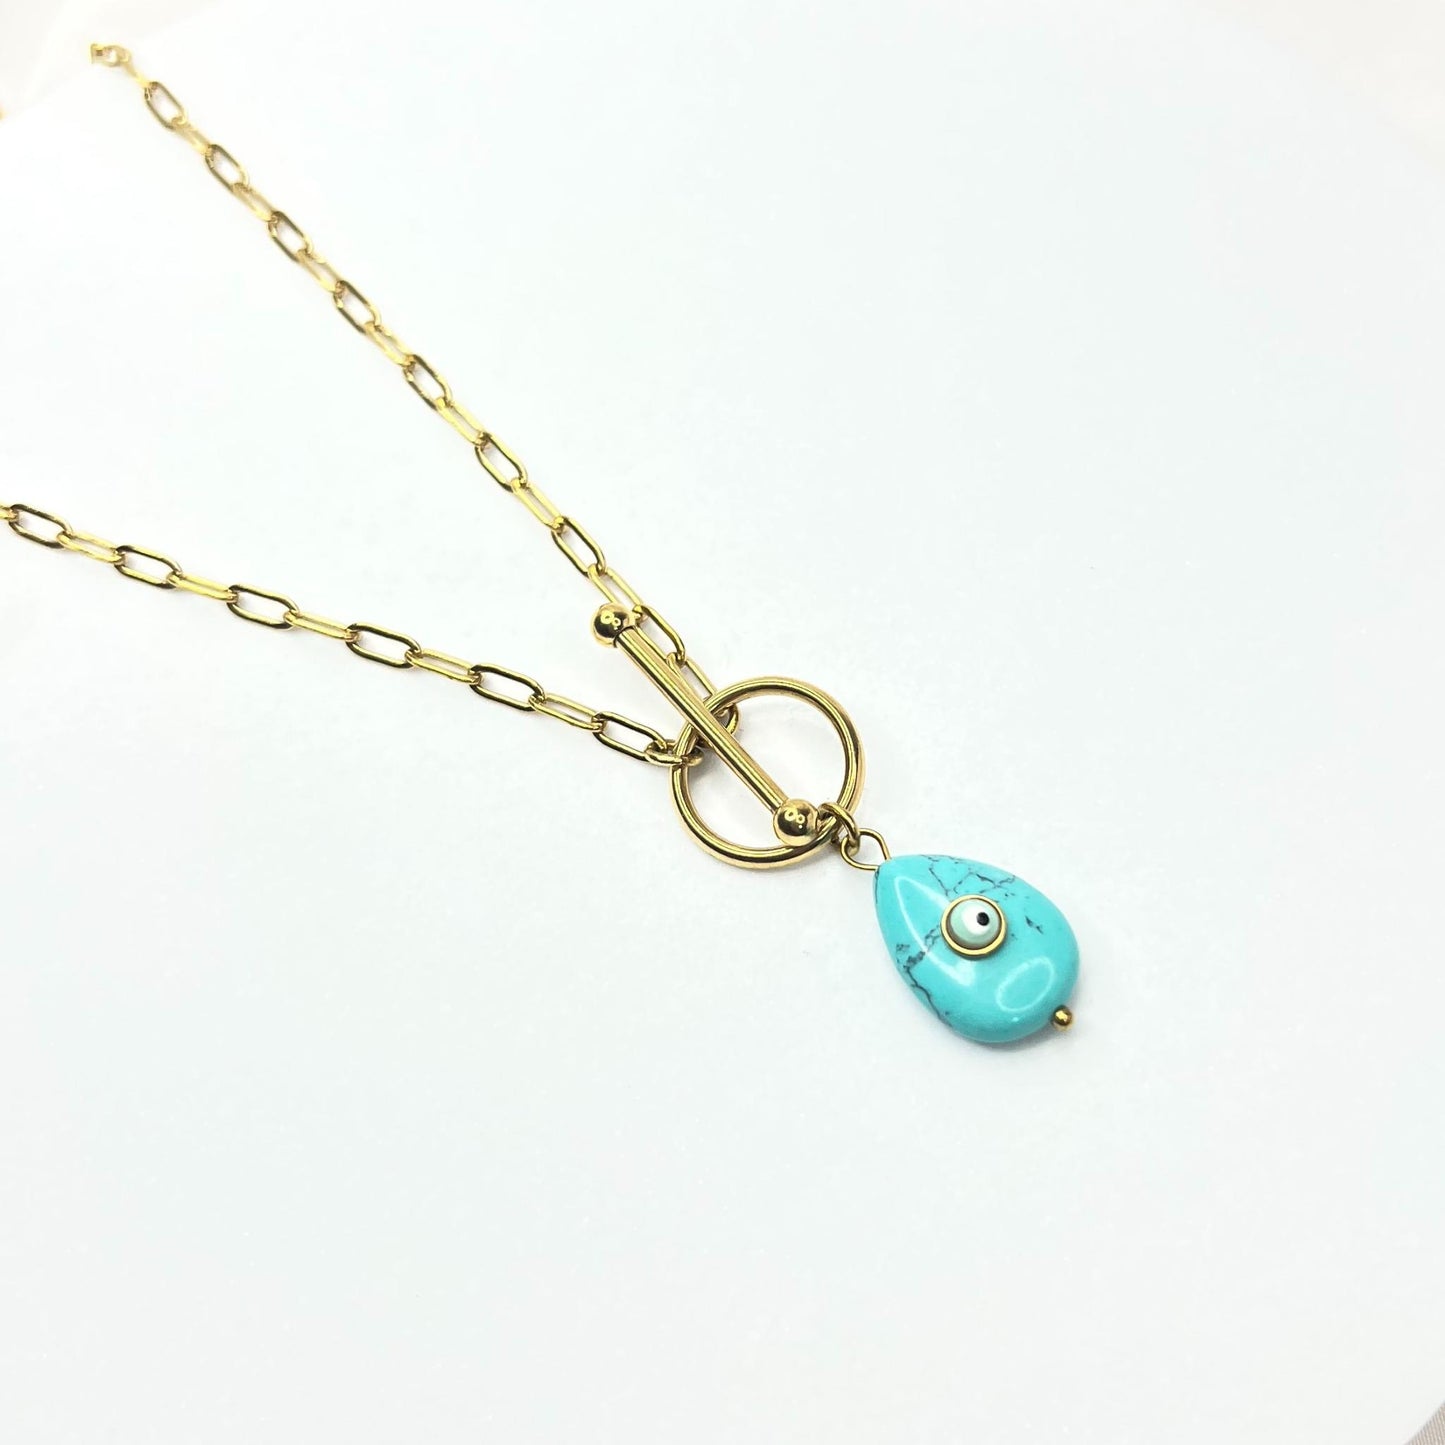 EYE | Necklace with Golden T Clasp and Teardrop Shape Pendant in Mixed Blue